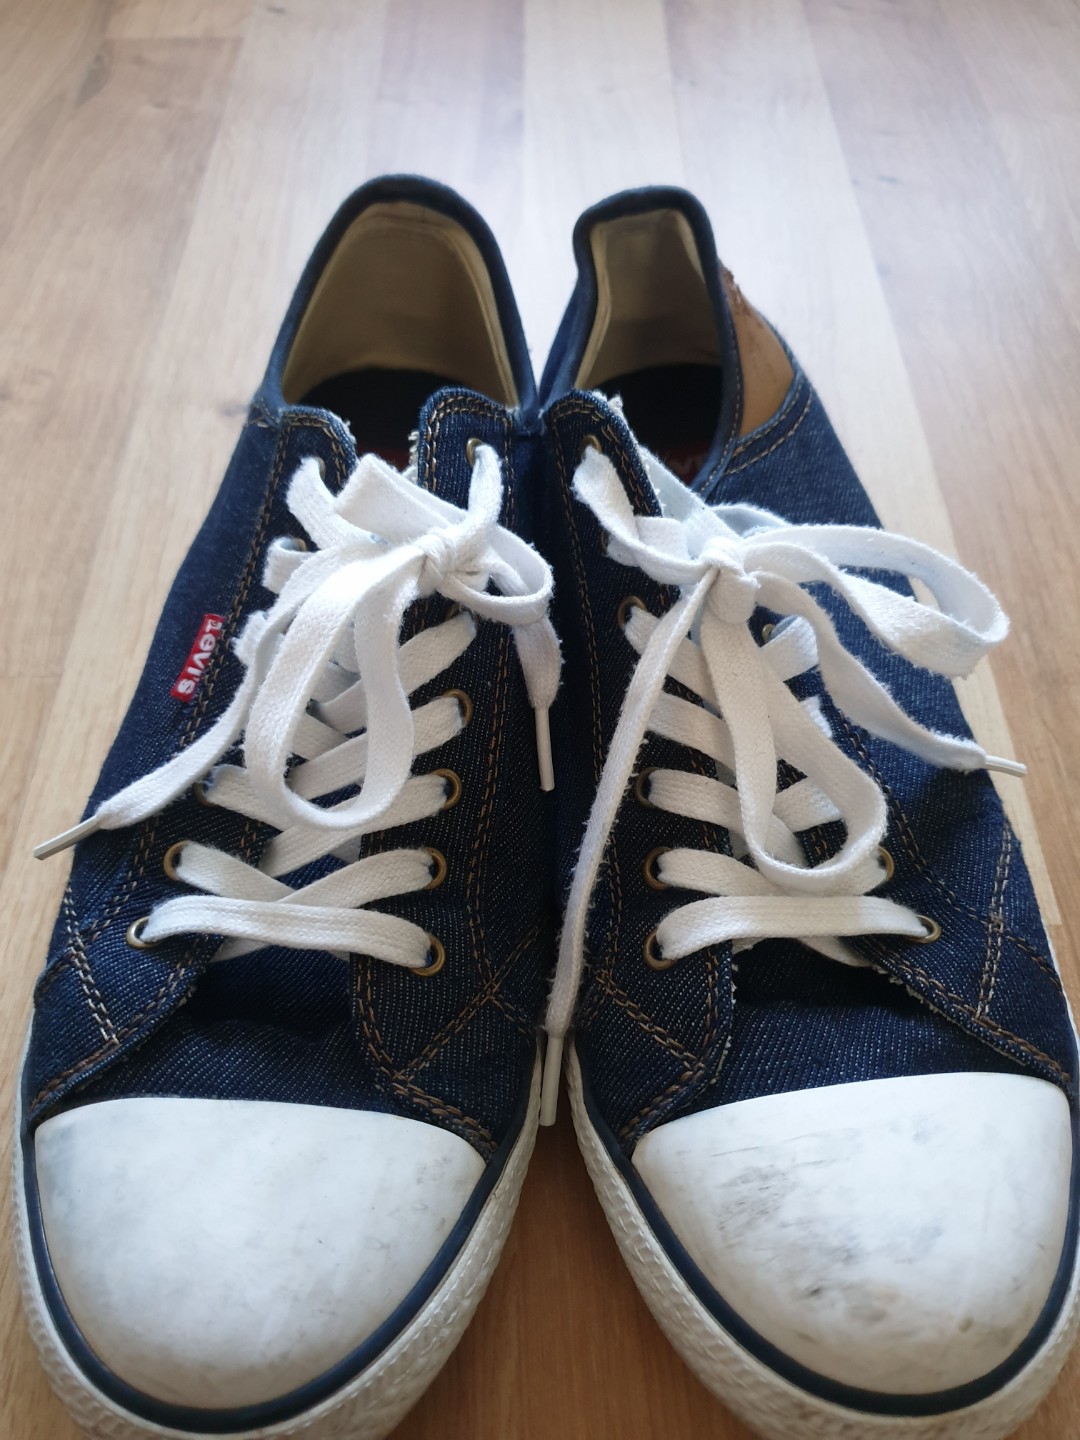 levi's navy blue sneakers